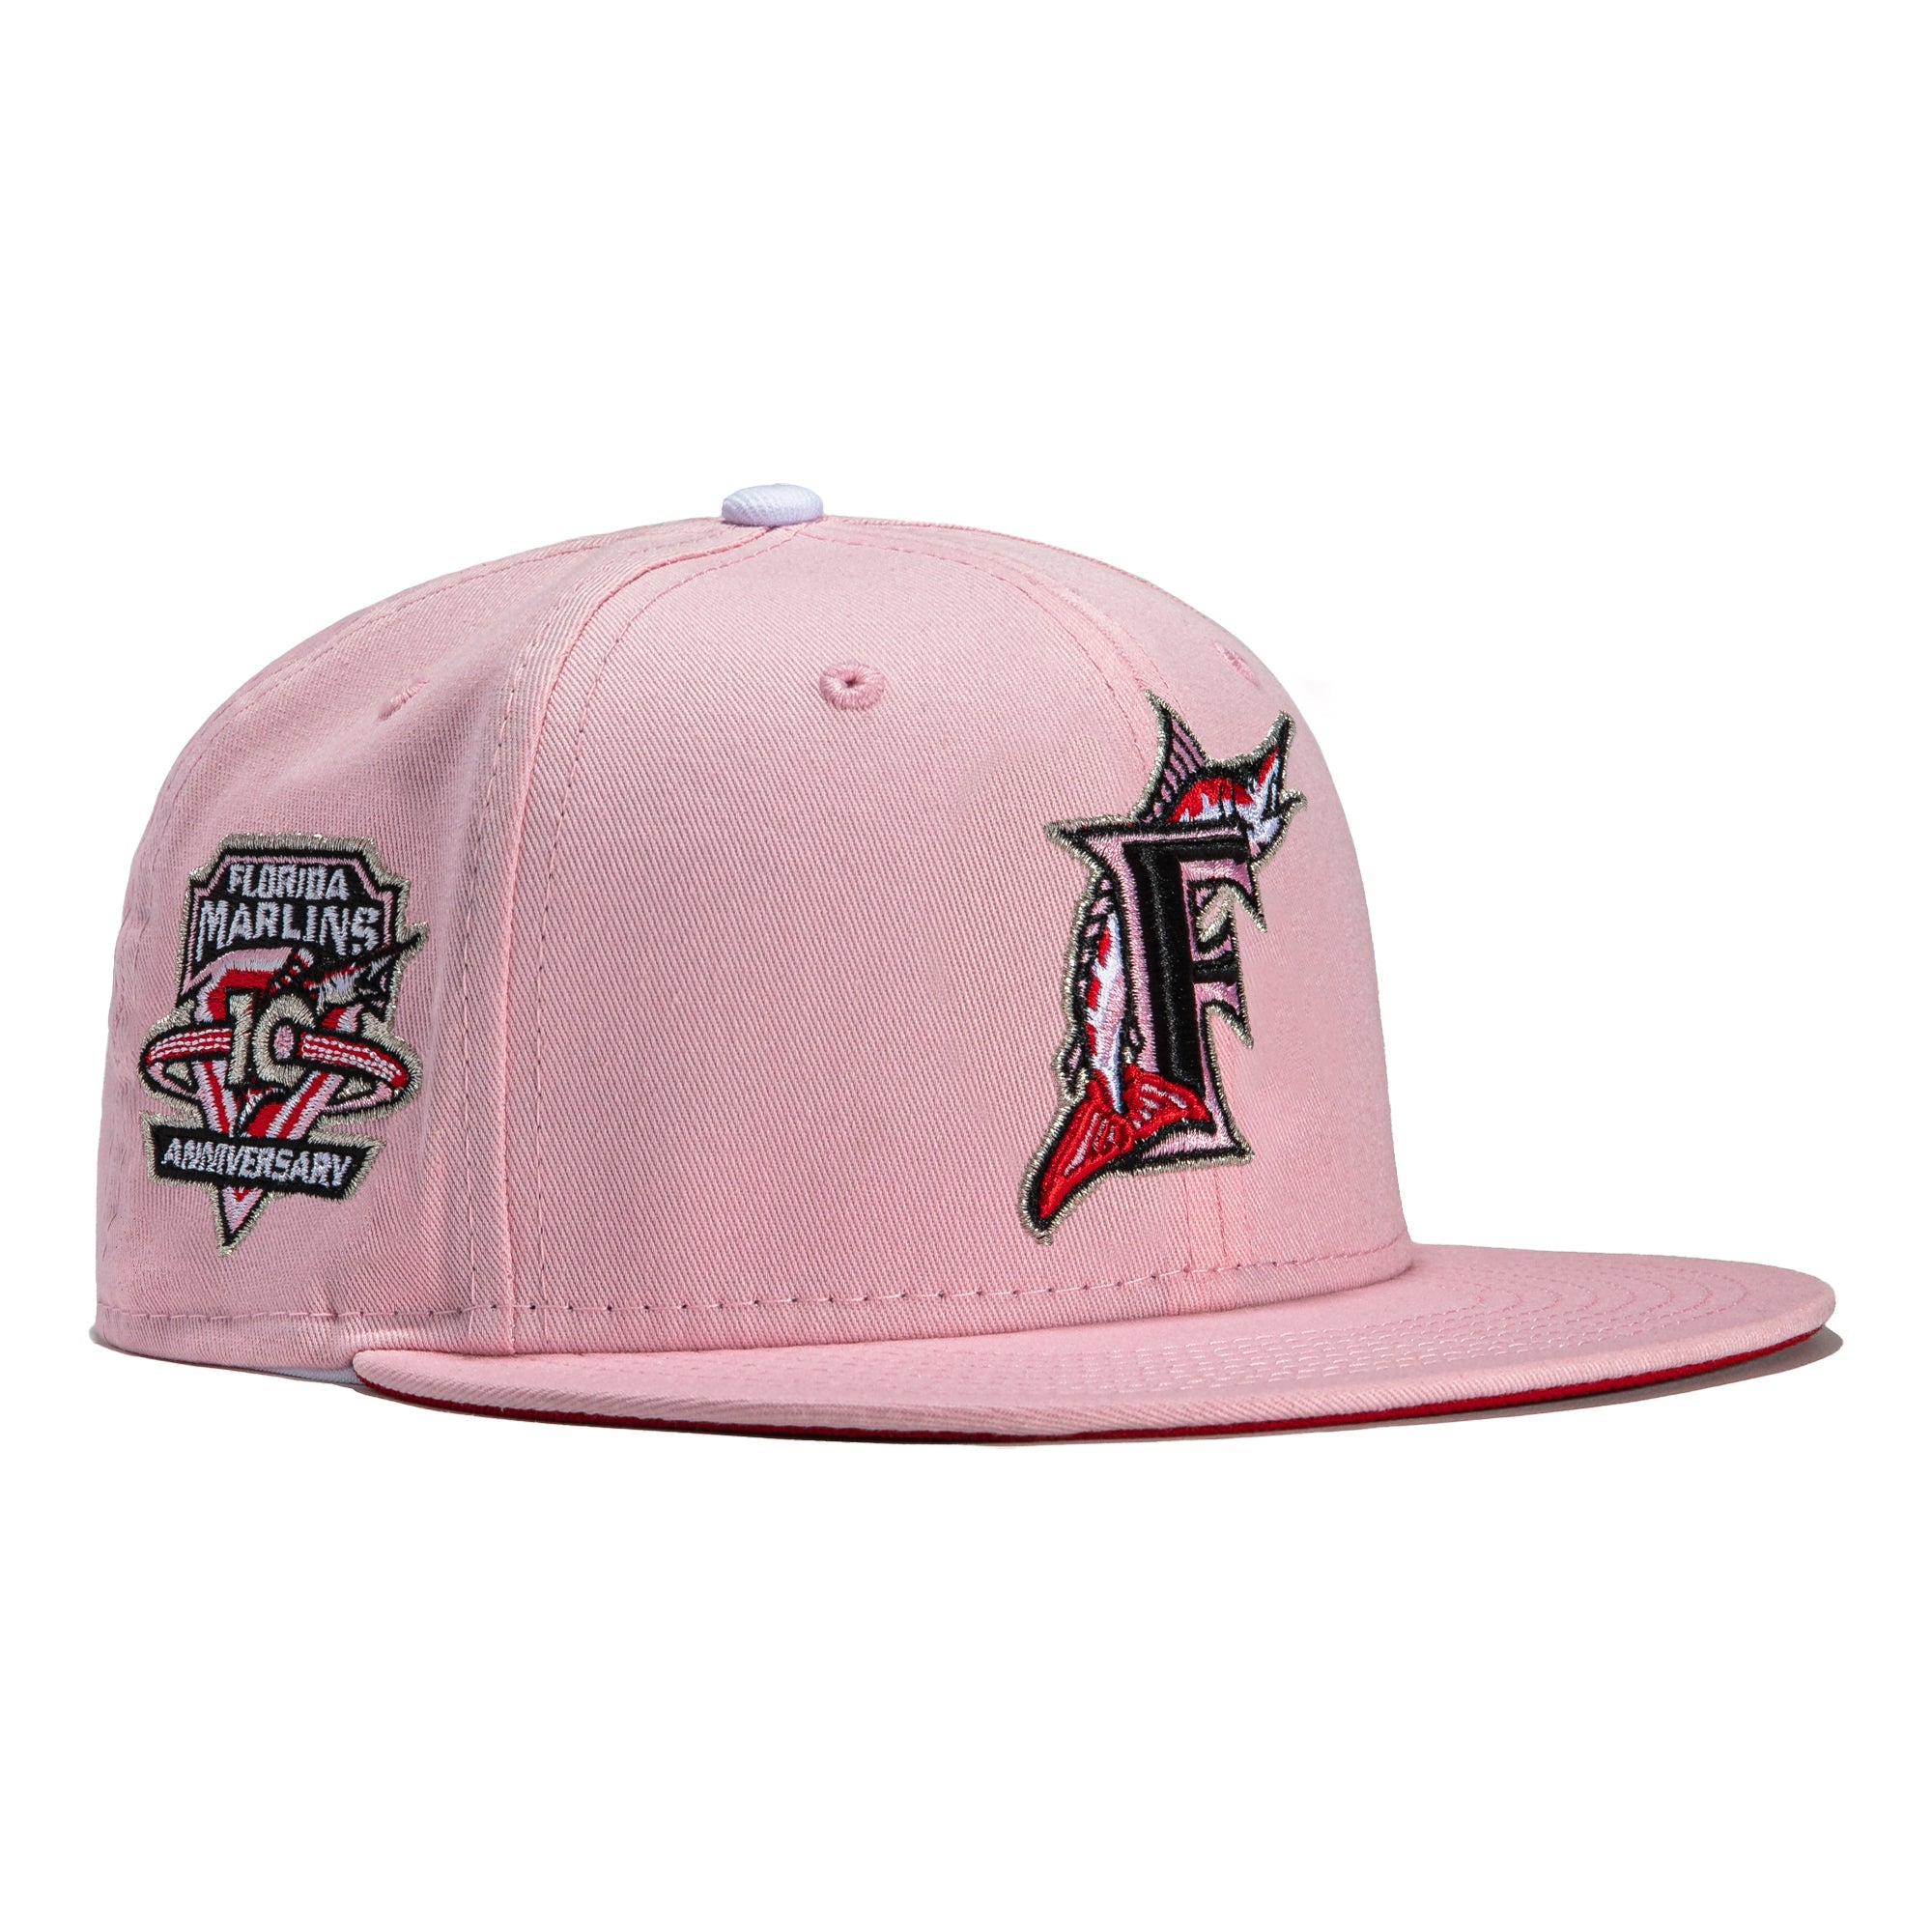 New Era Strawberry Jam Florida Marlins 10th Anniversary 59FIFTY Fitted